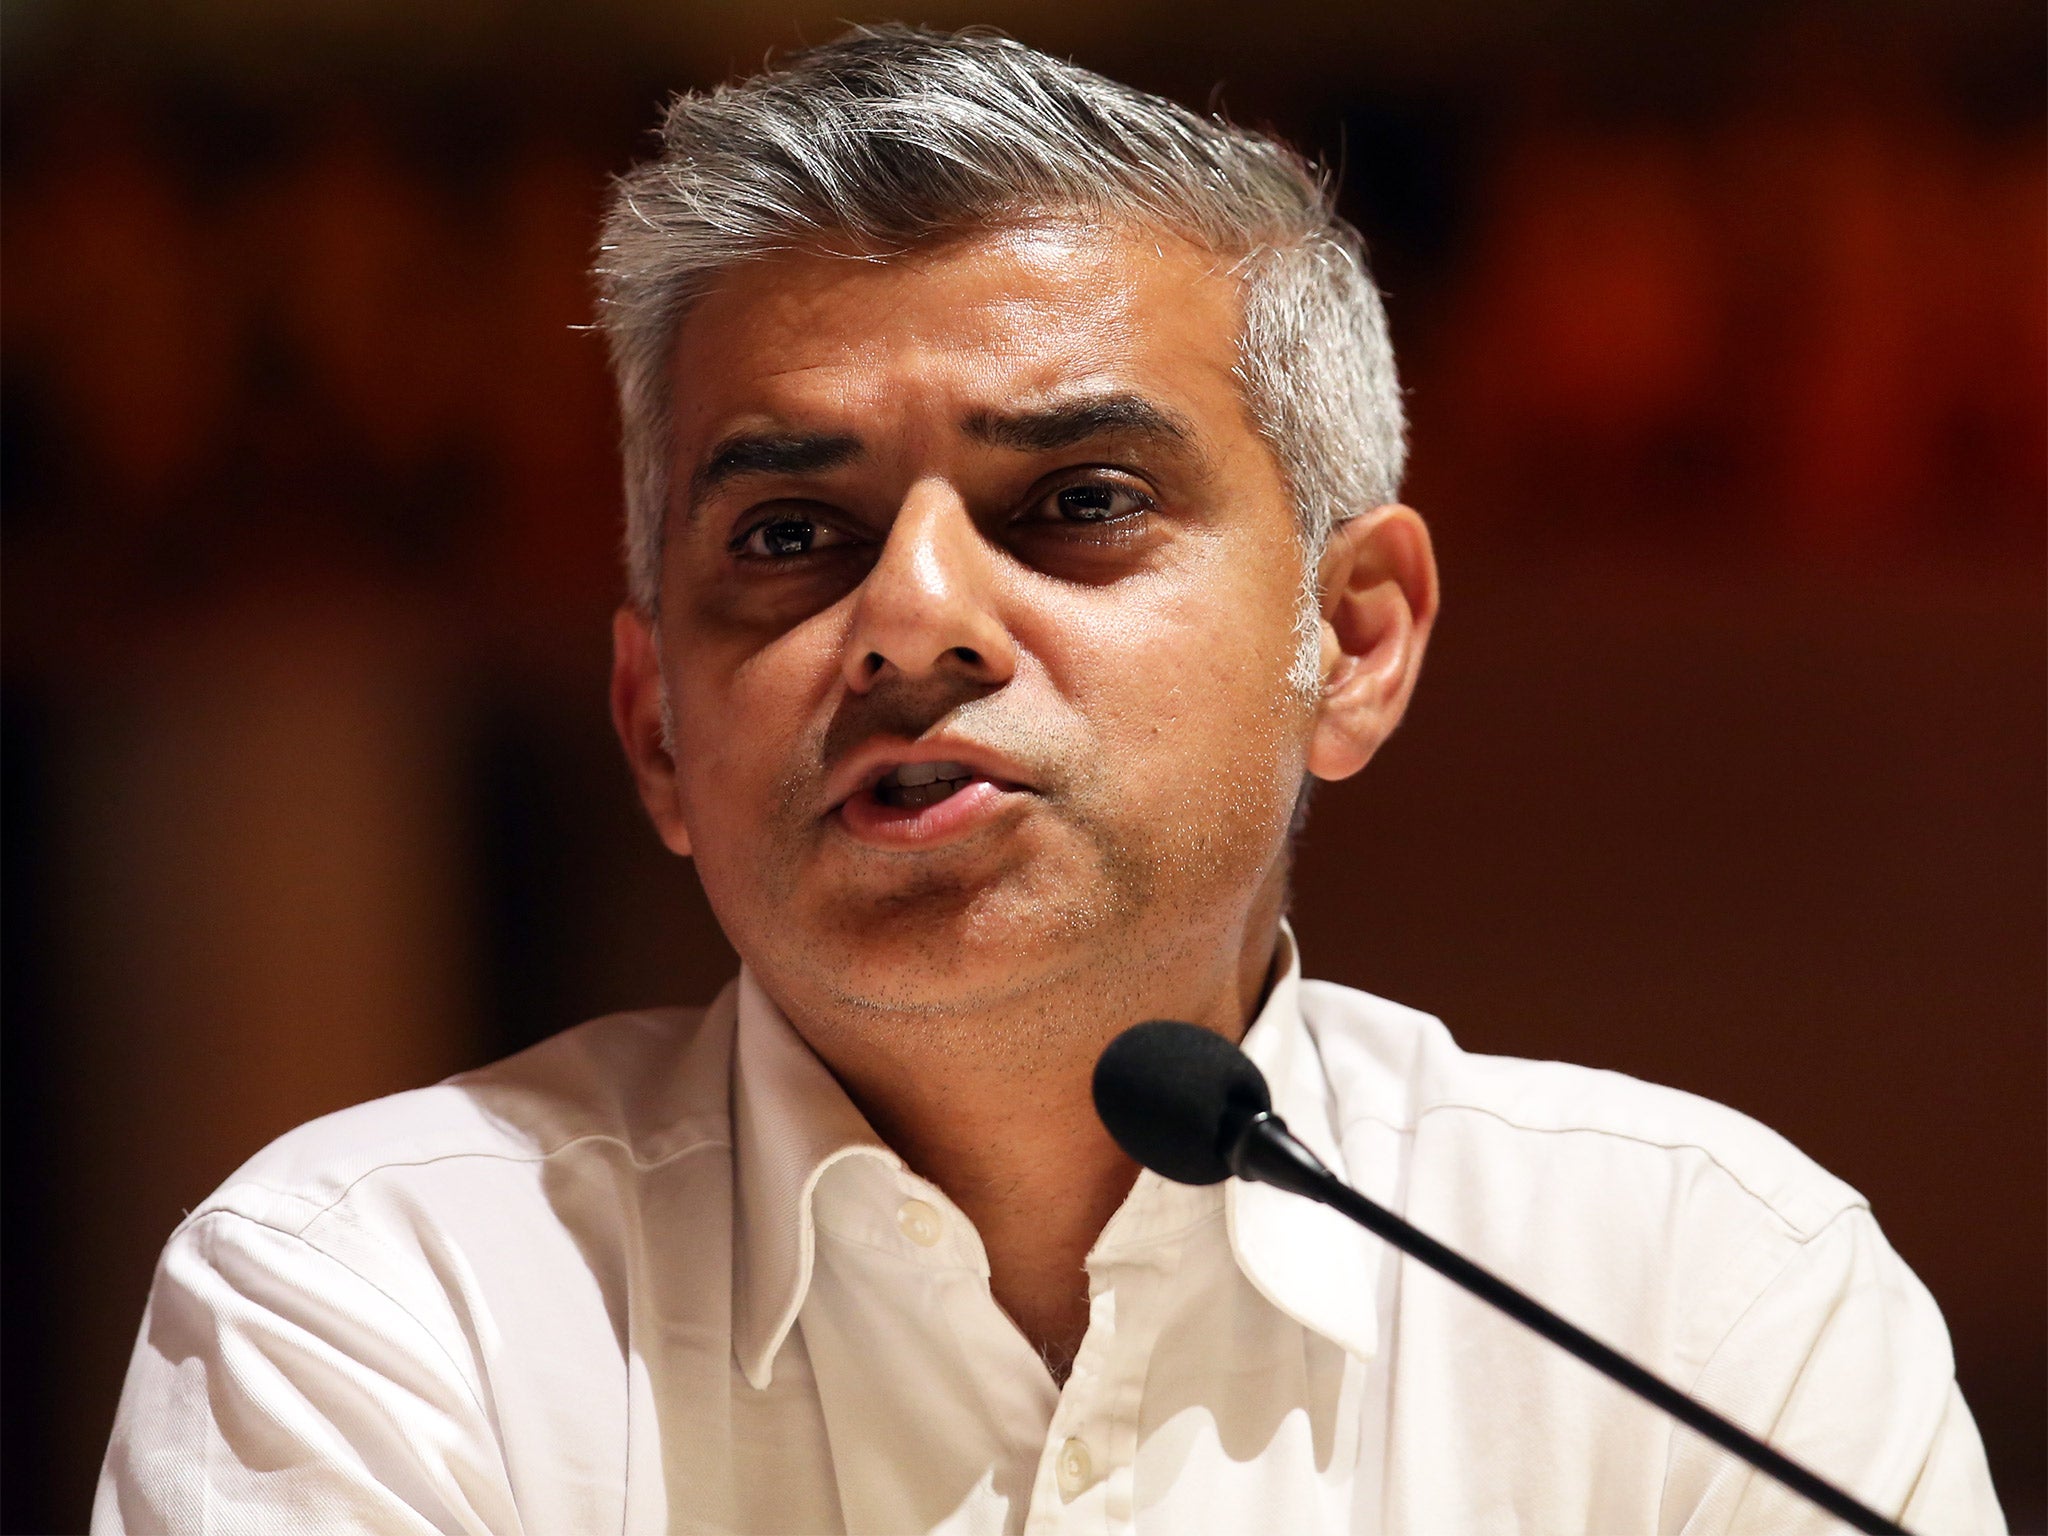 Sadiq Khan speaks during a Labour party mayoral hustings two weeks ago